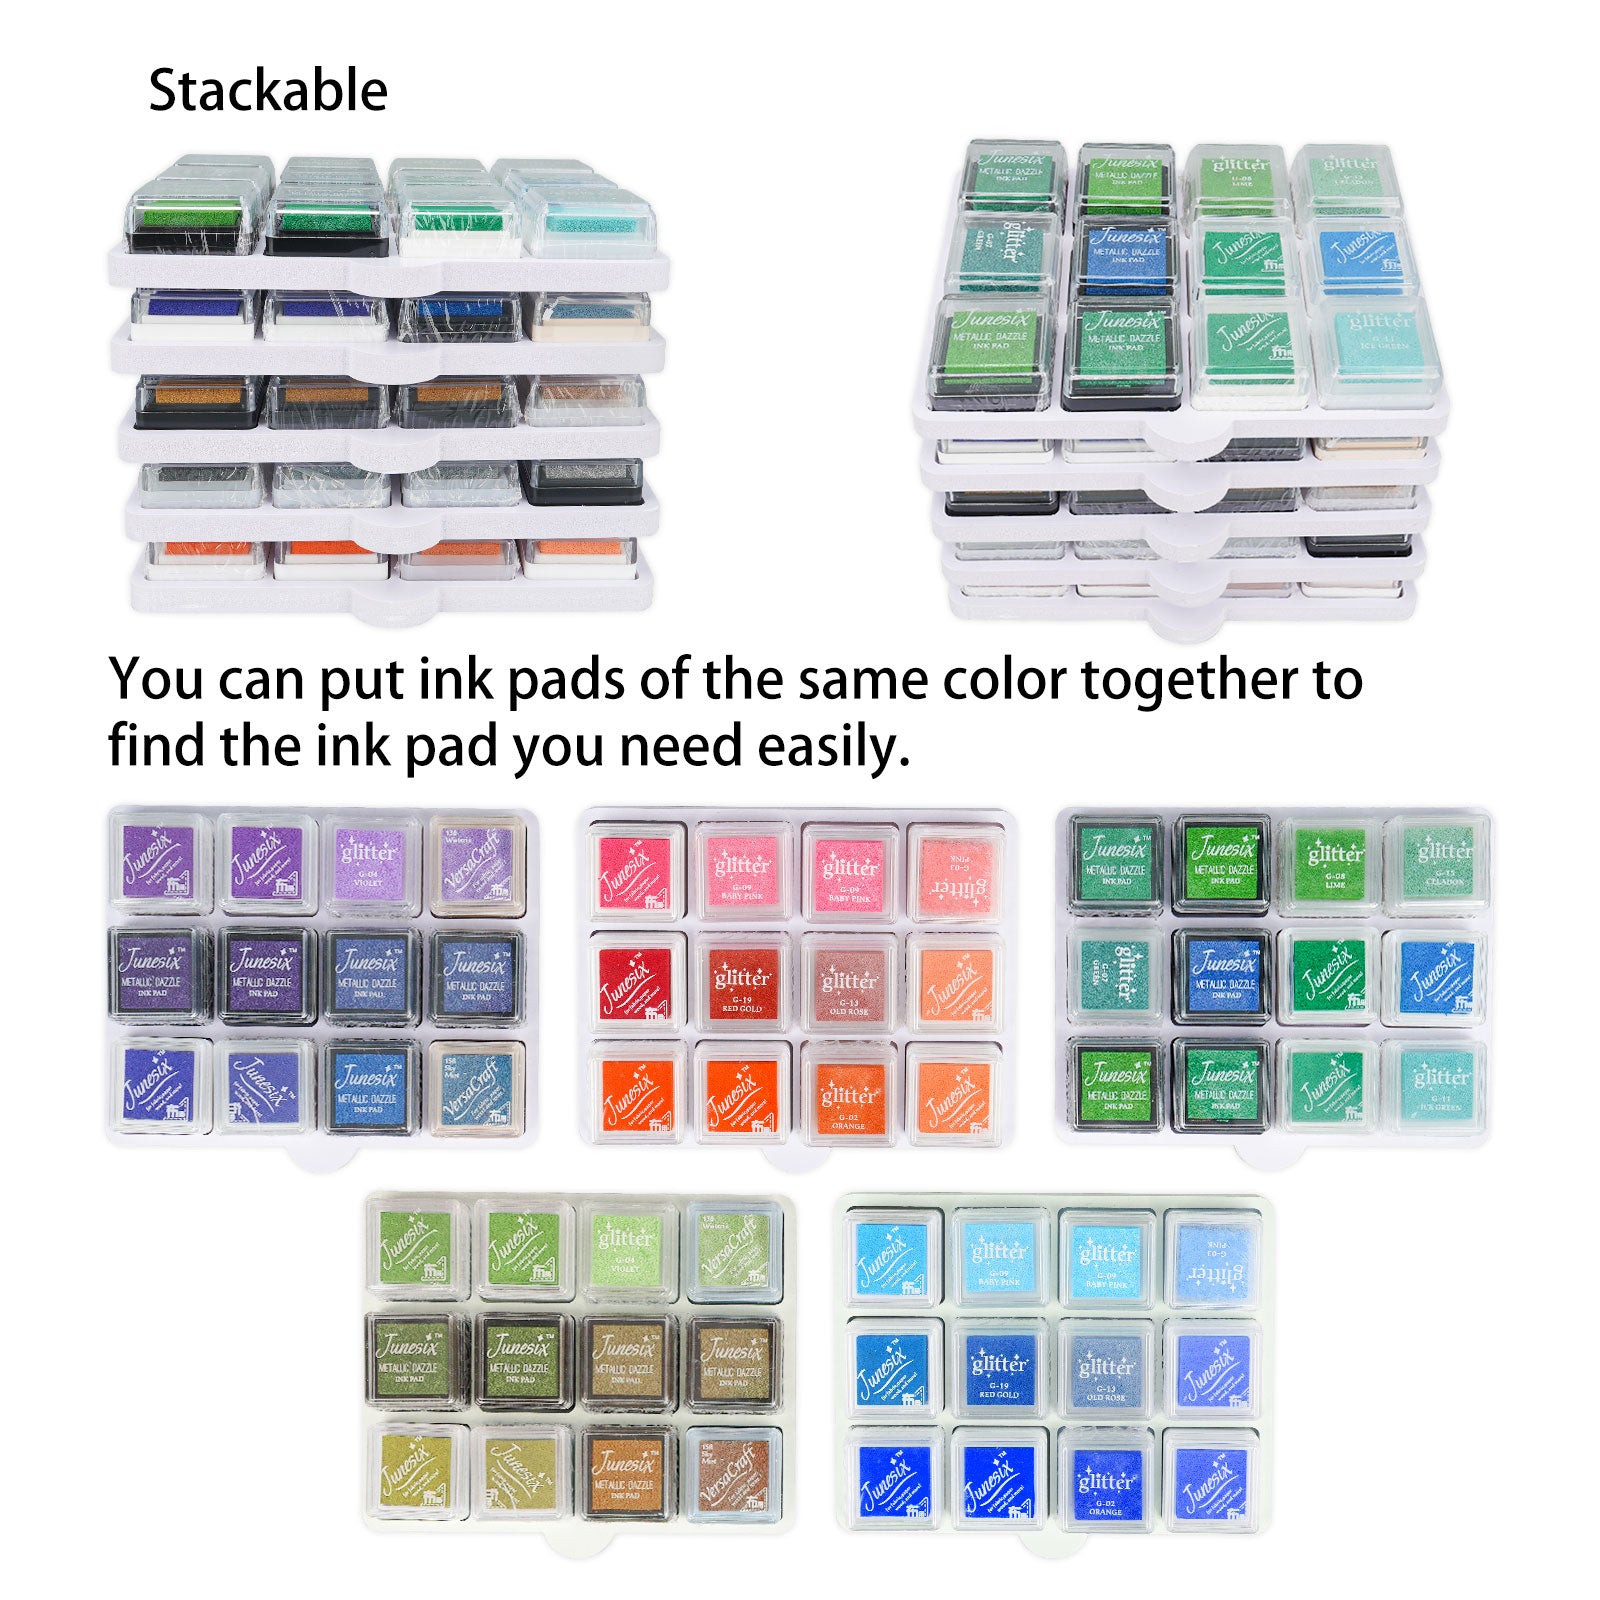 the mini cube ink pads can be stacked with each other